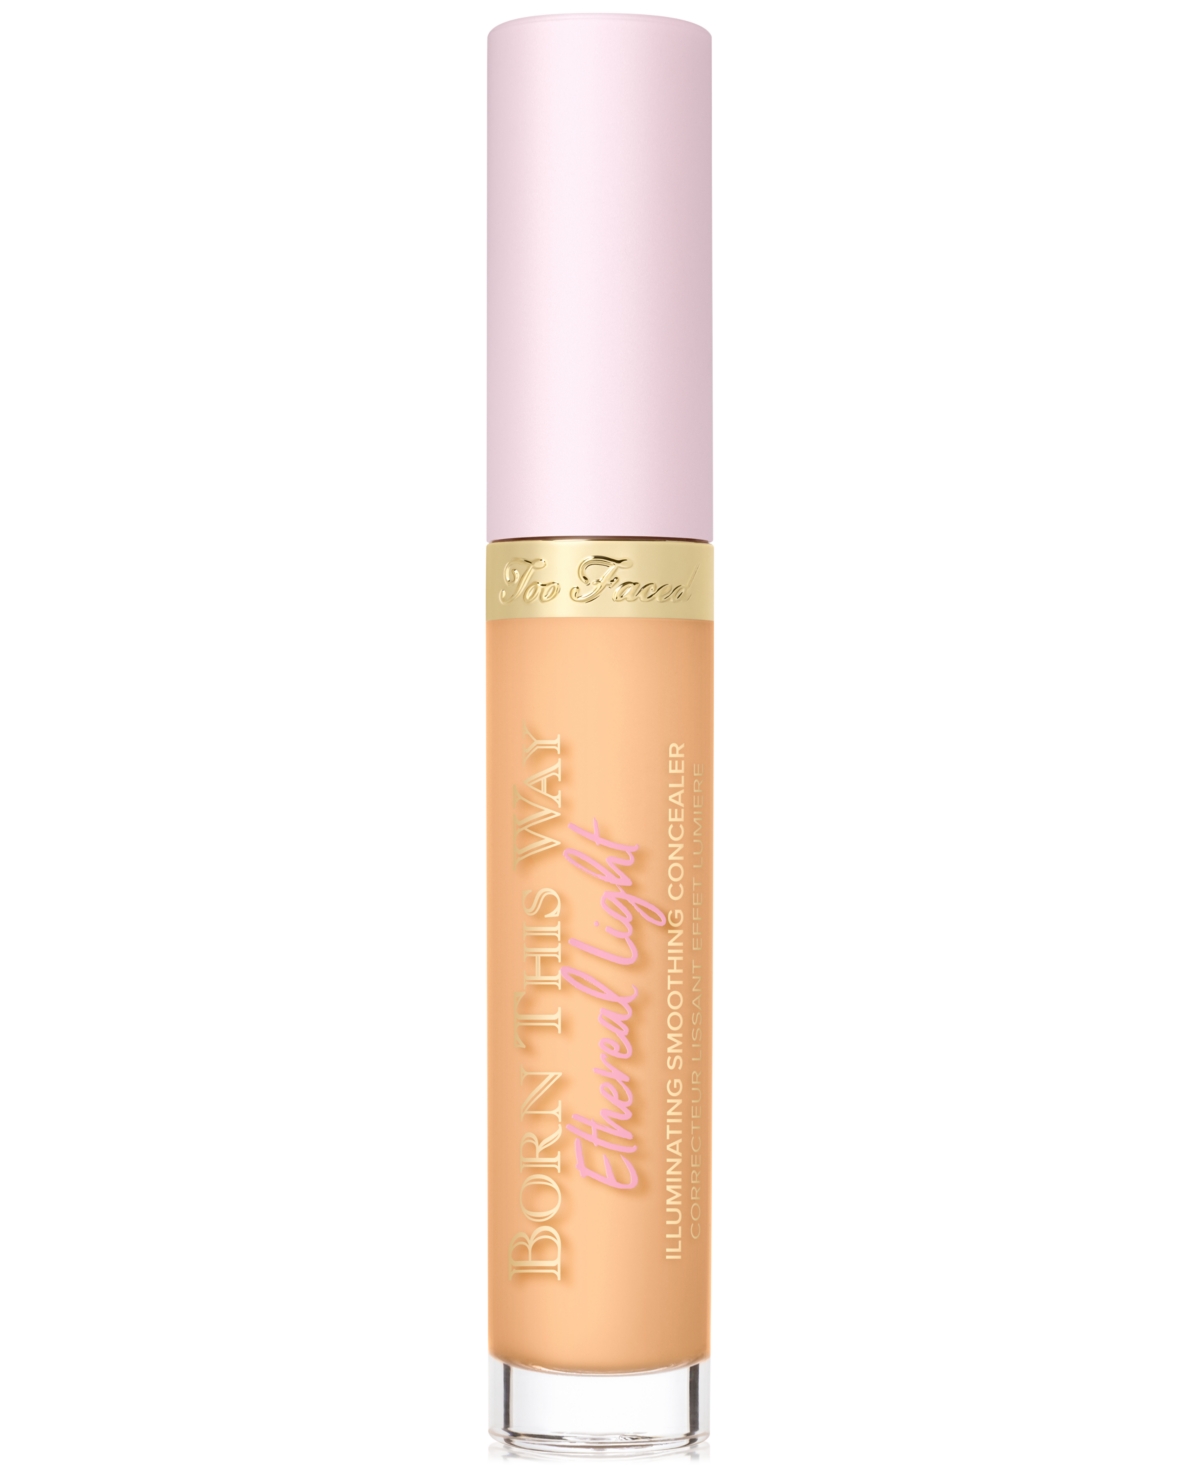 Too Faced Born This Way Ethereal Light Illuminating Smoothing Concealer In Biscotti - Medium With Golden Undertones